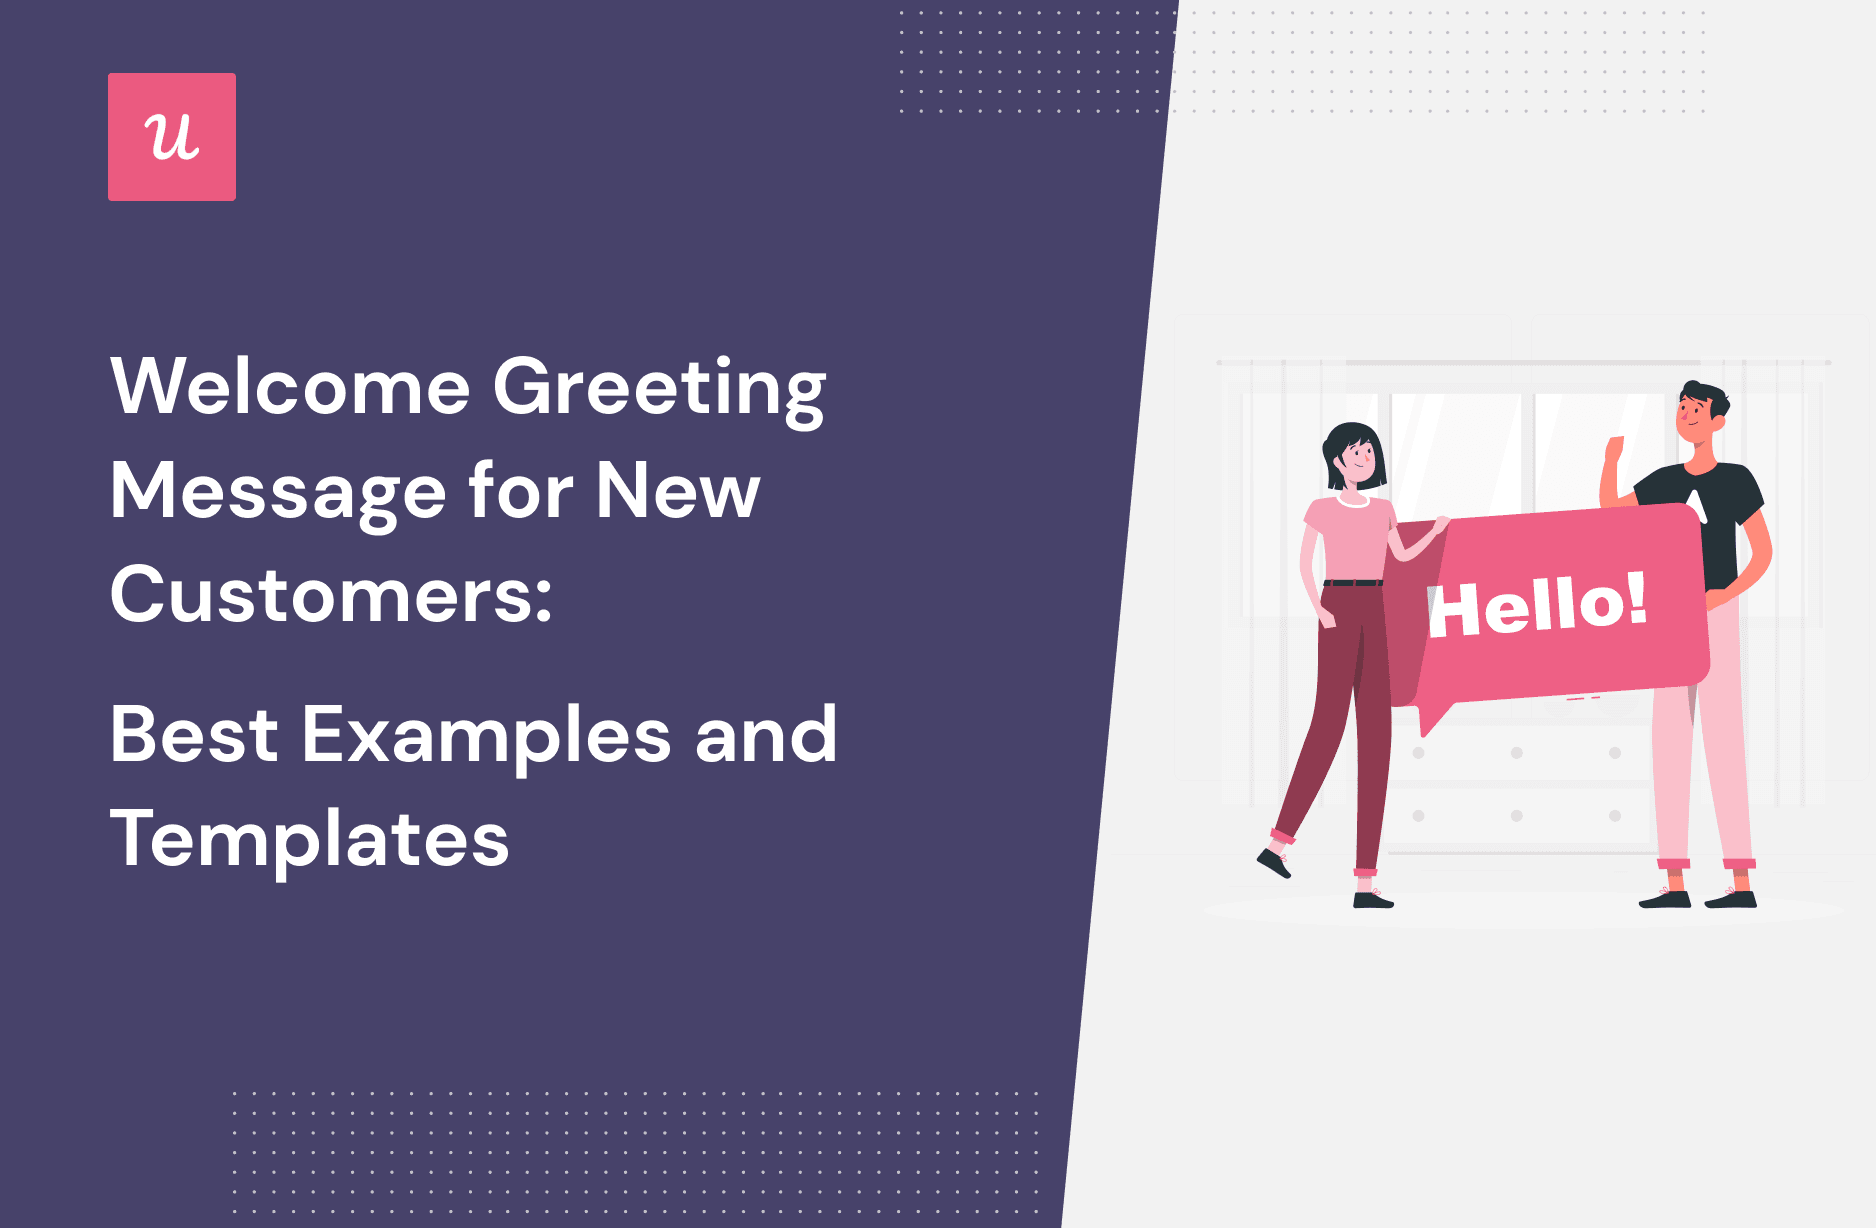 Welcome Greeting Message for New Customers: Best Examples and Templates